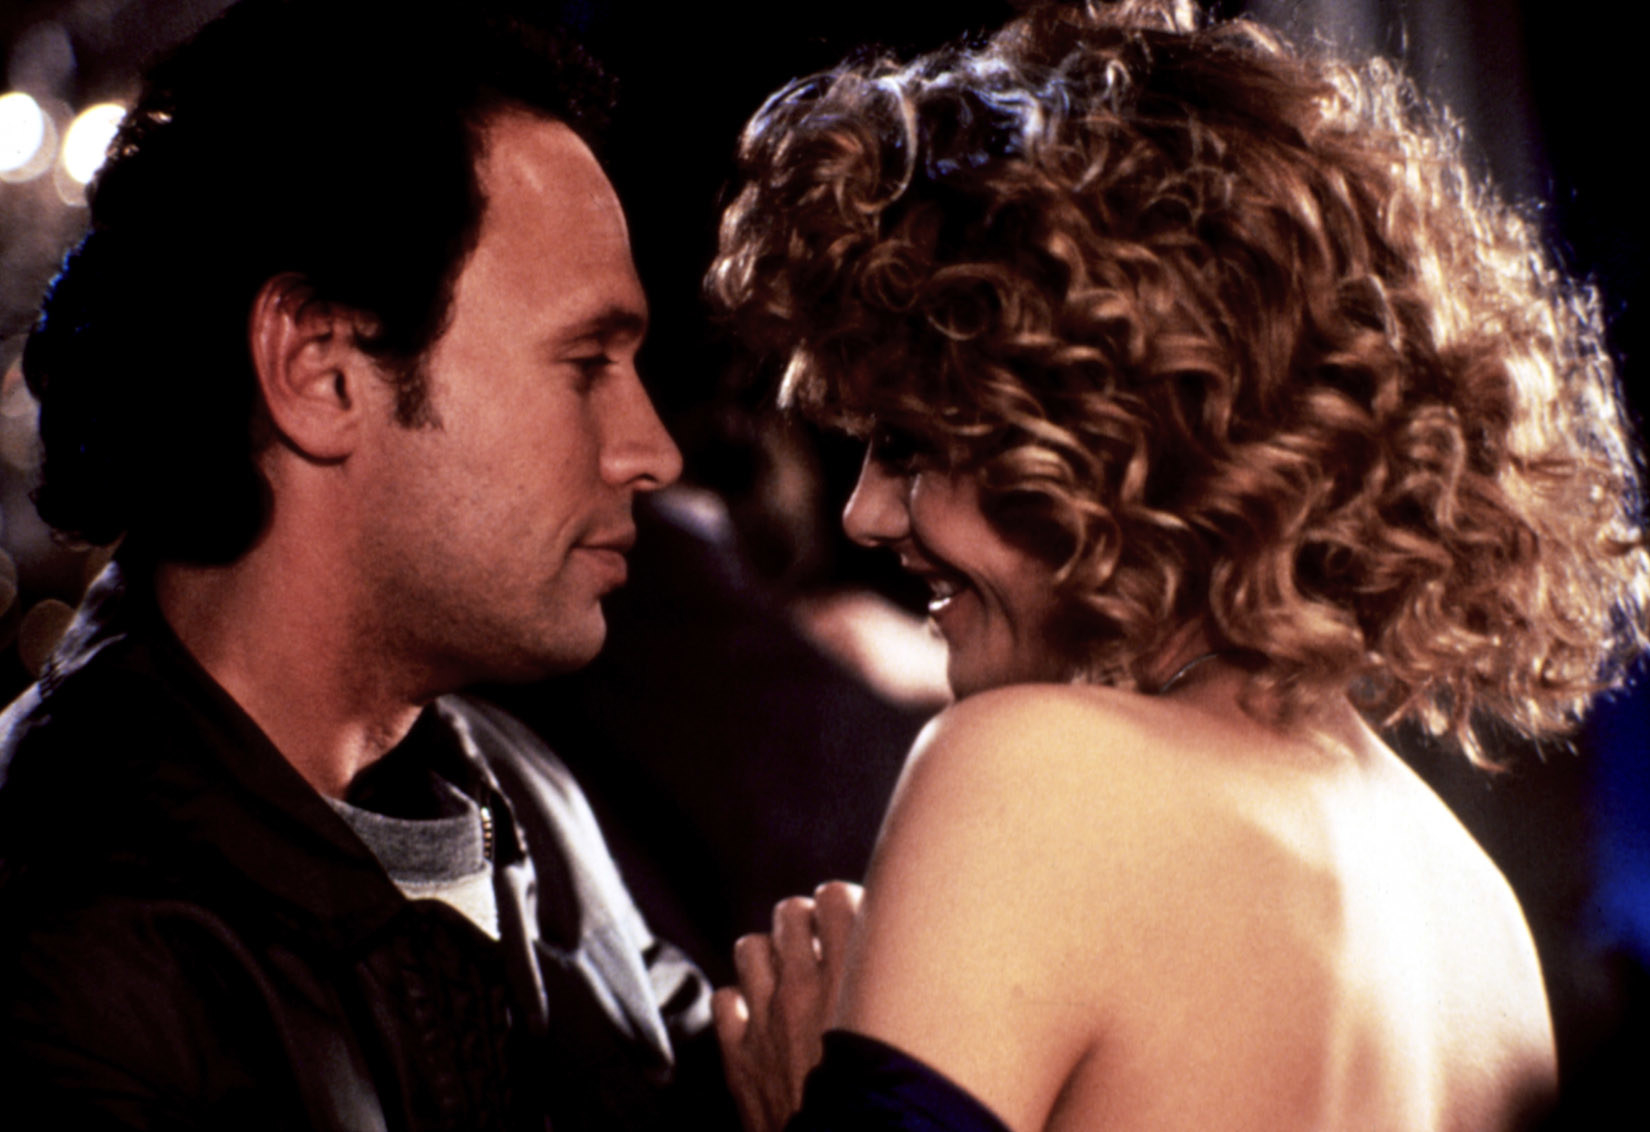 Billy Crystal and Meg Ryan looking at each other and smiling